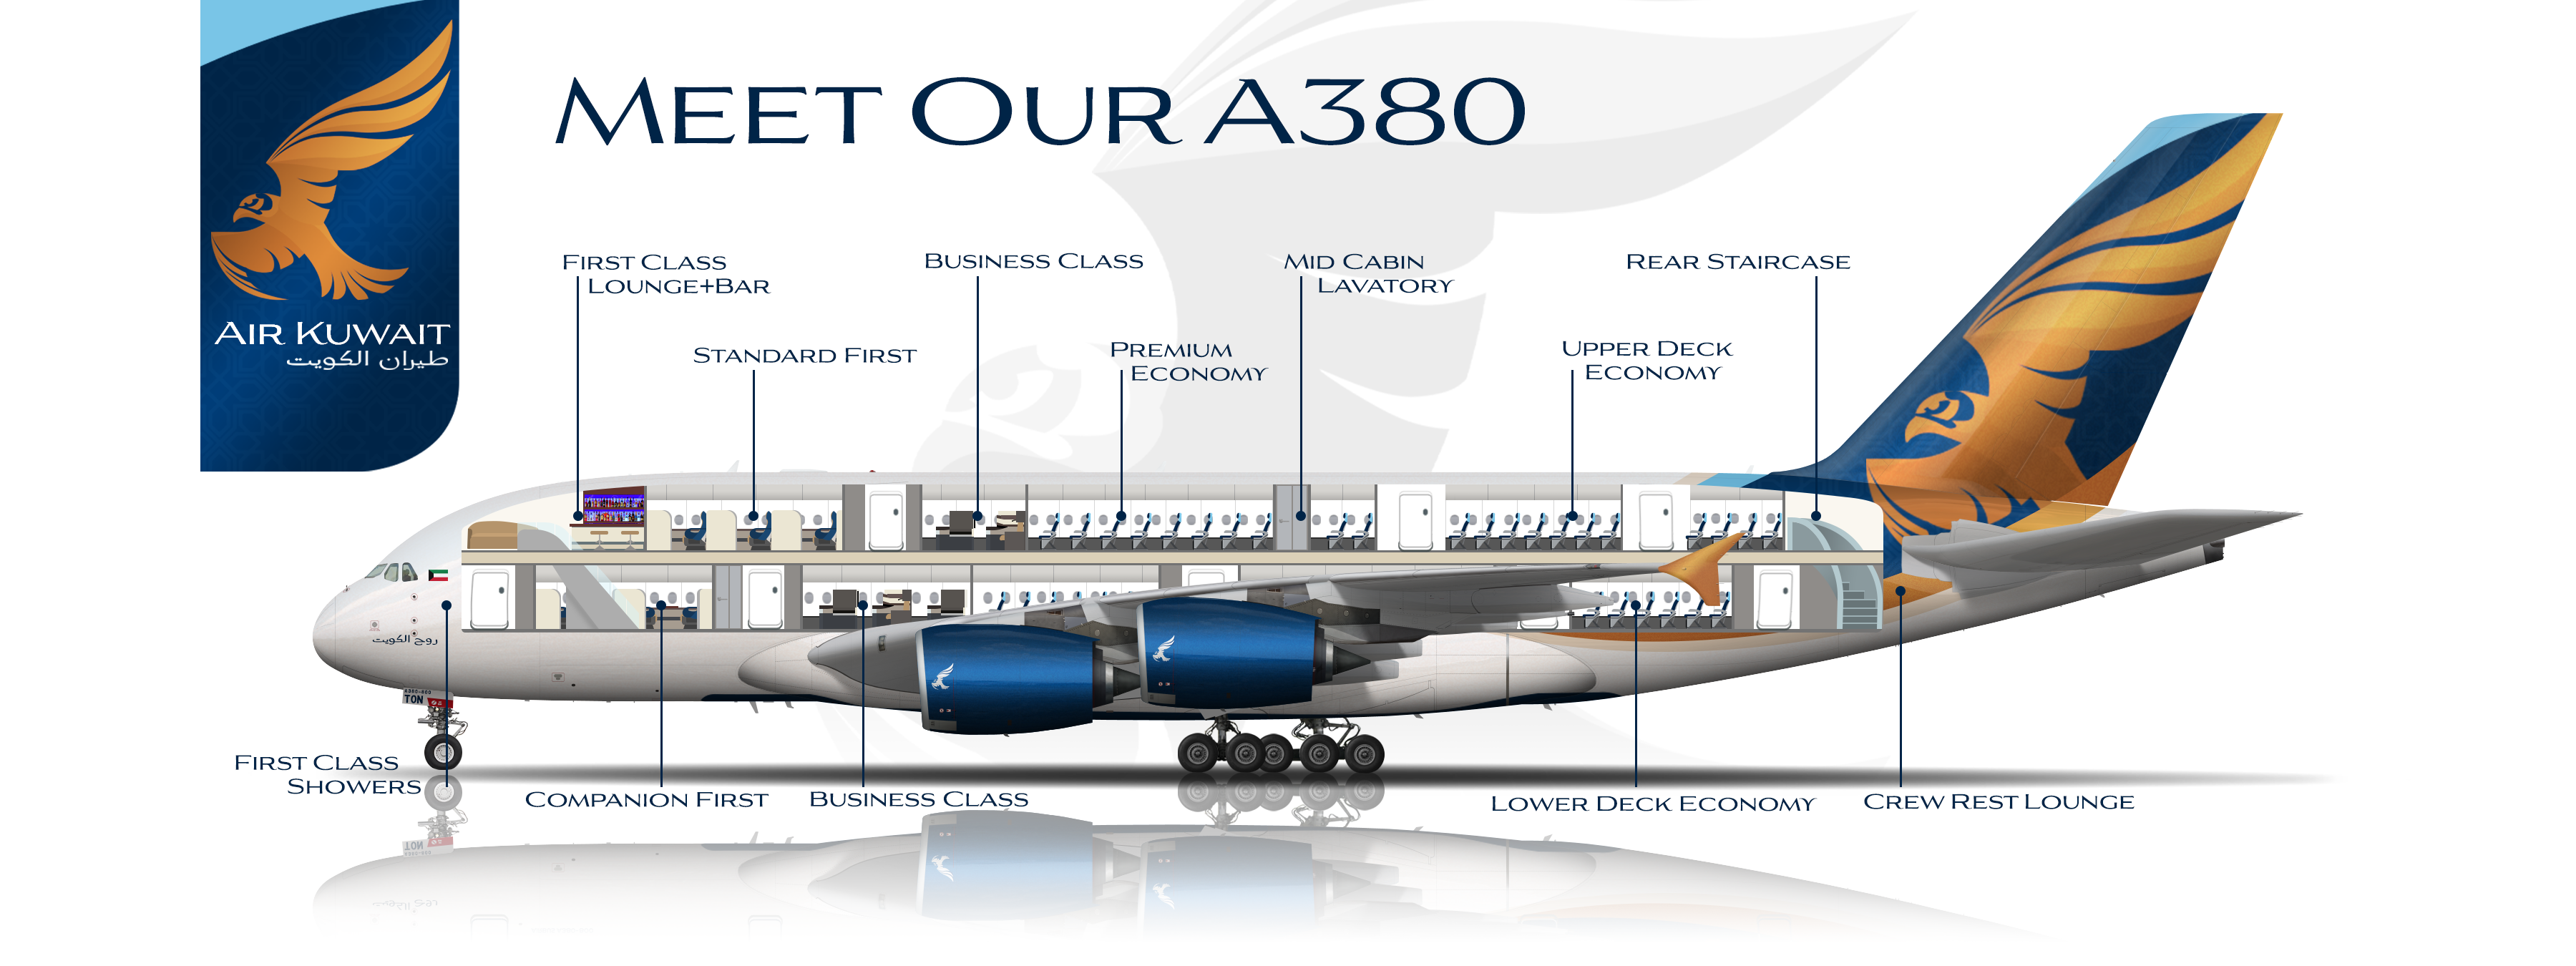 Airbus A380 800 Cutaway - Air Kuwait - Gallery - Airline Empires